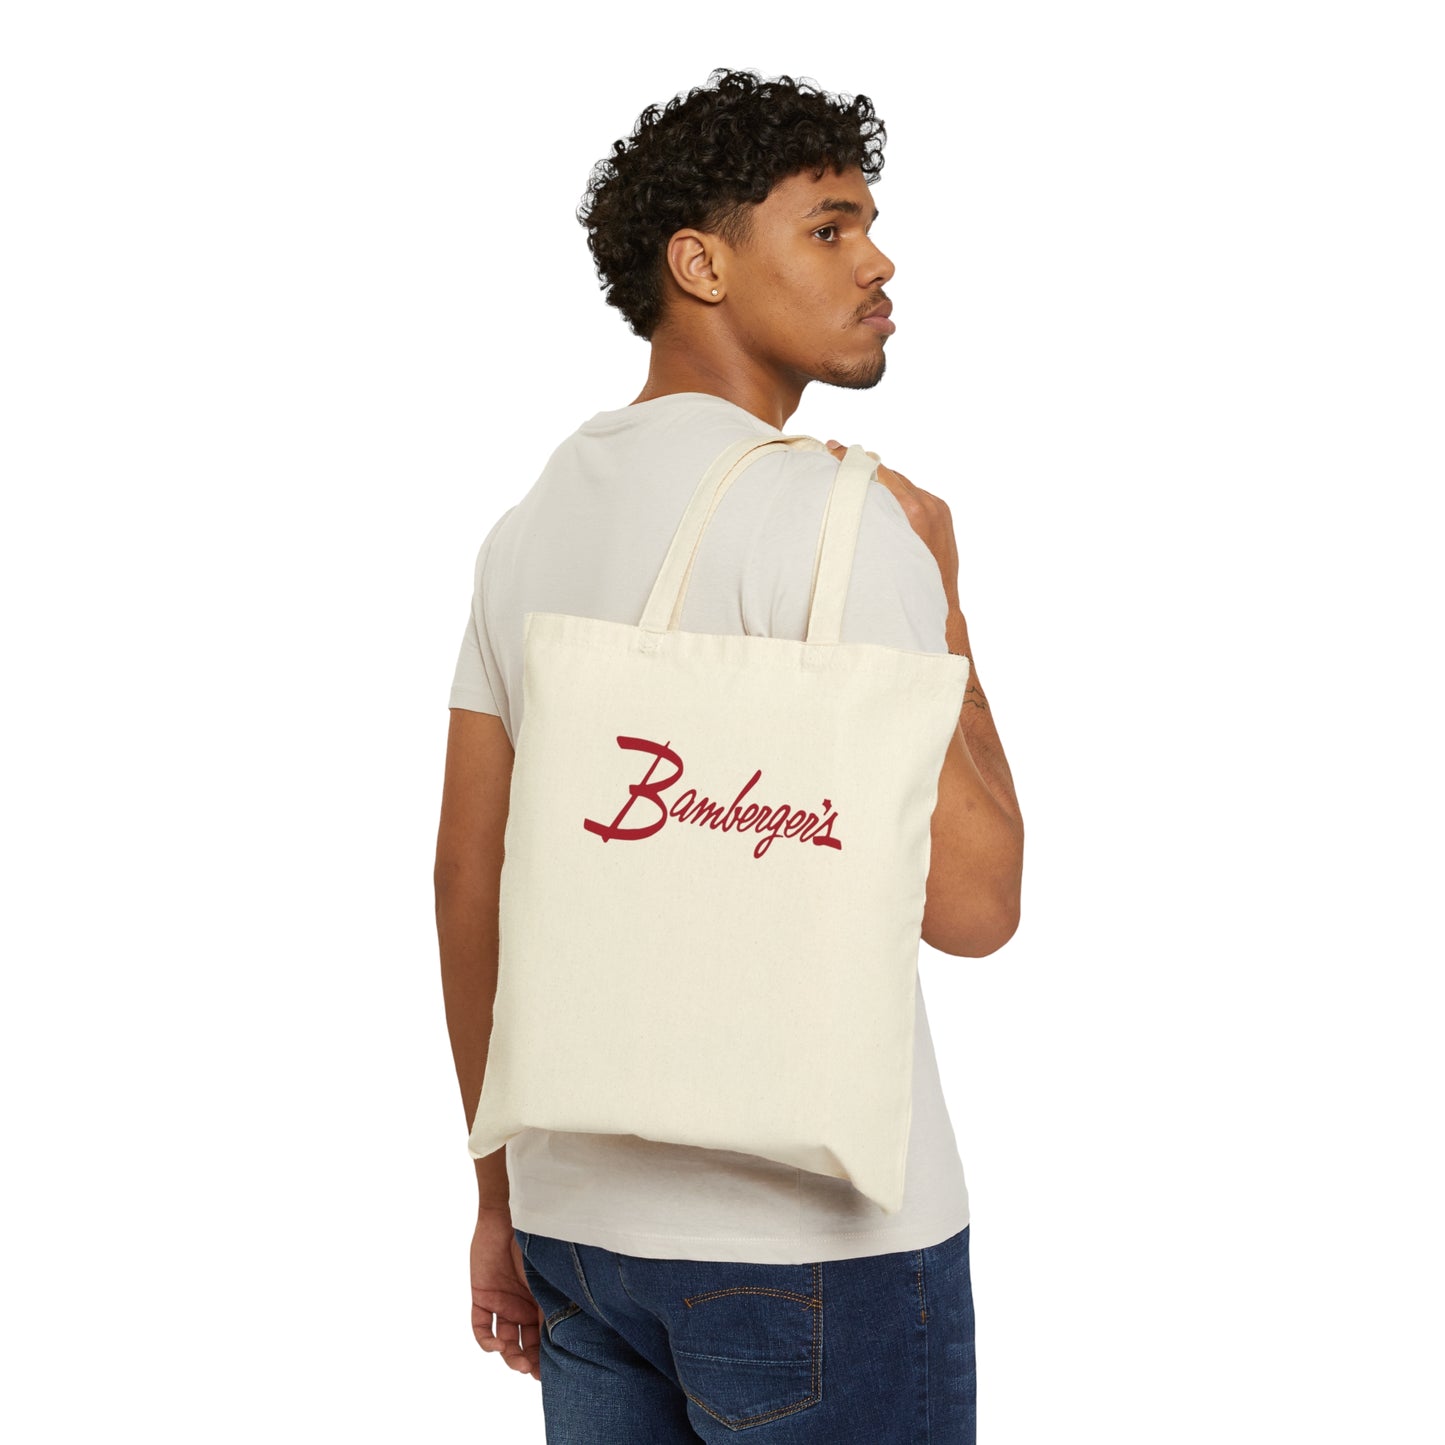 Bamberger's - Canvas Tote Bag